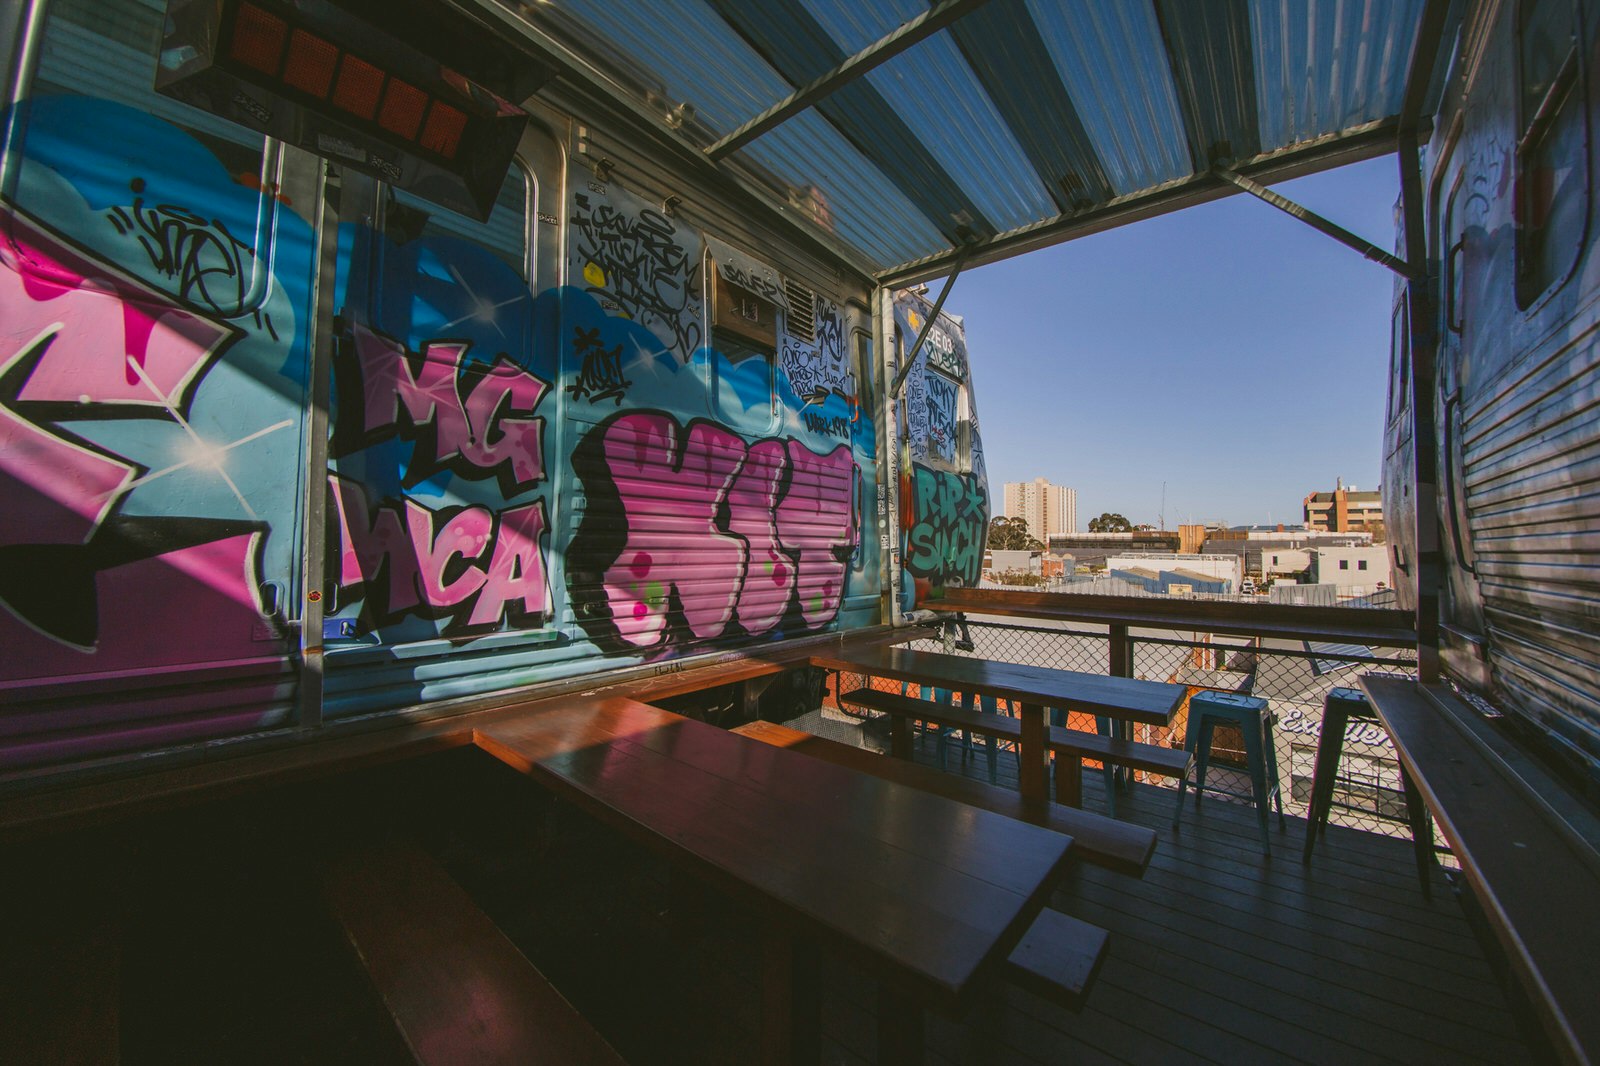 A view of Collingwood, Melbourne from Easey's rooftop bar. Wooden tables and benches are inside old camper vans heavily decorated with colourful graffiti